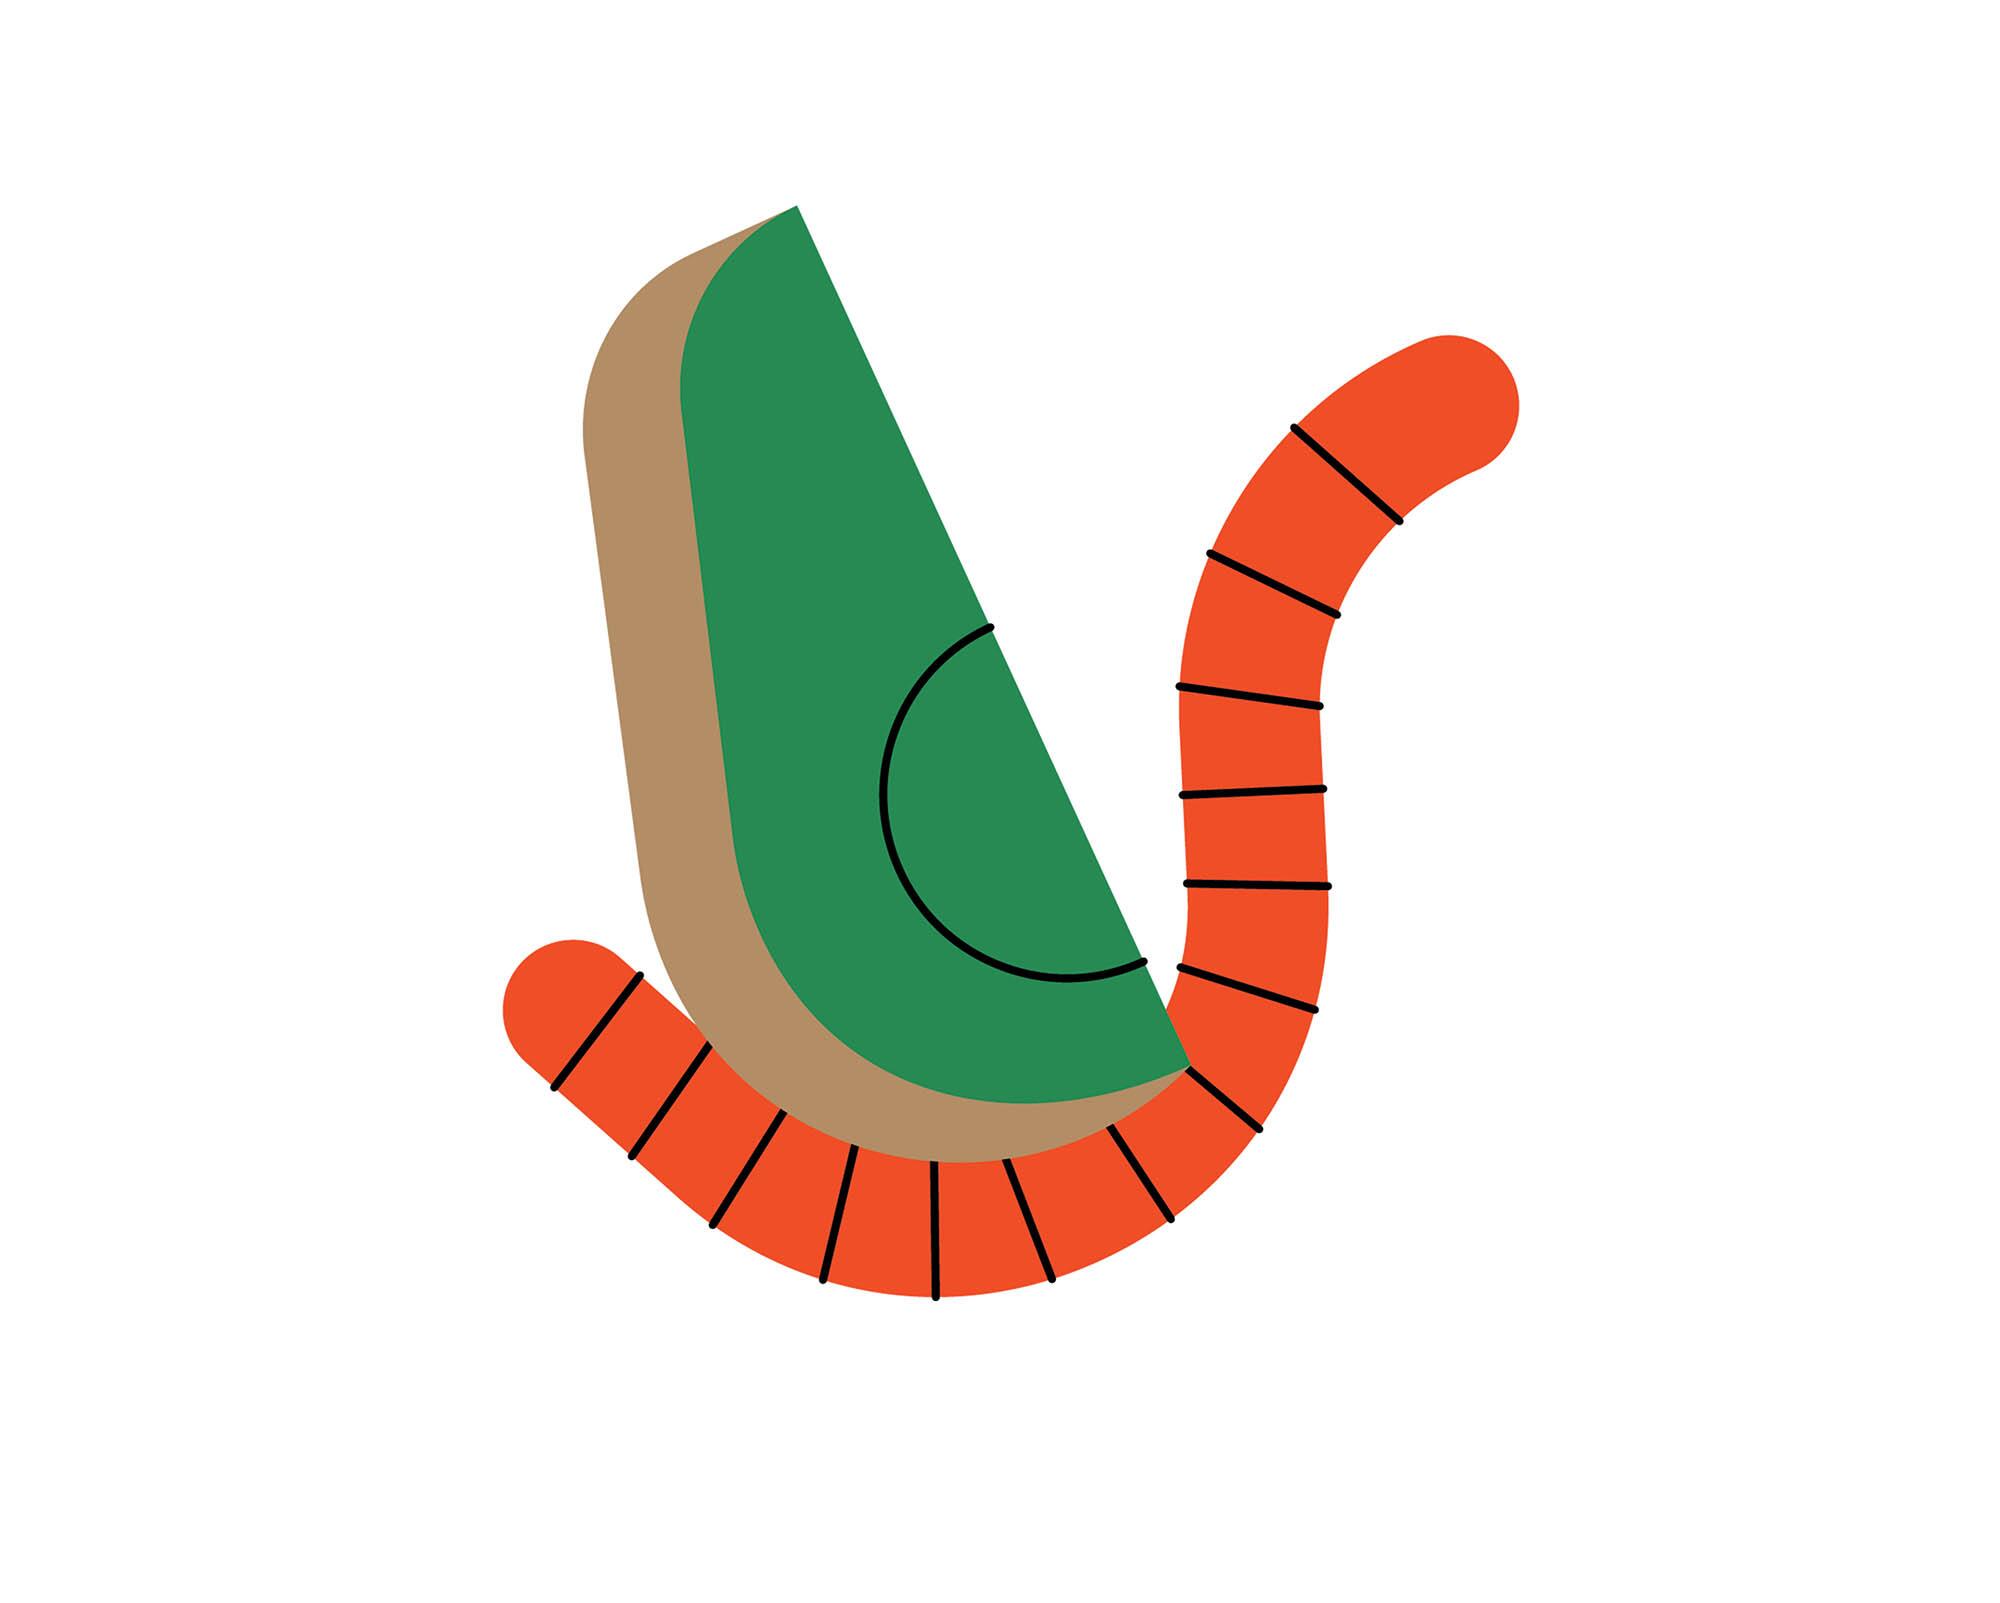 An illustration of an avocado and a red worm